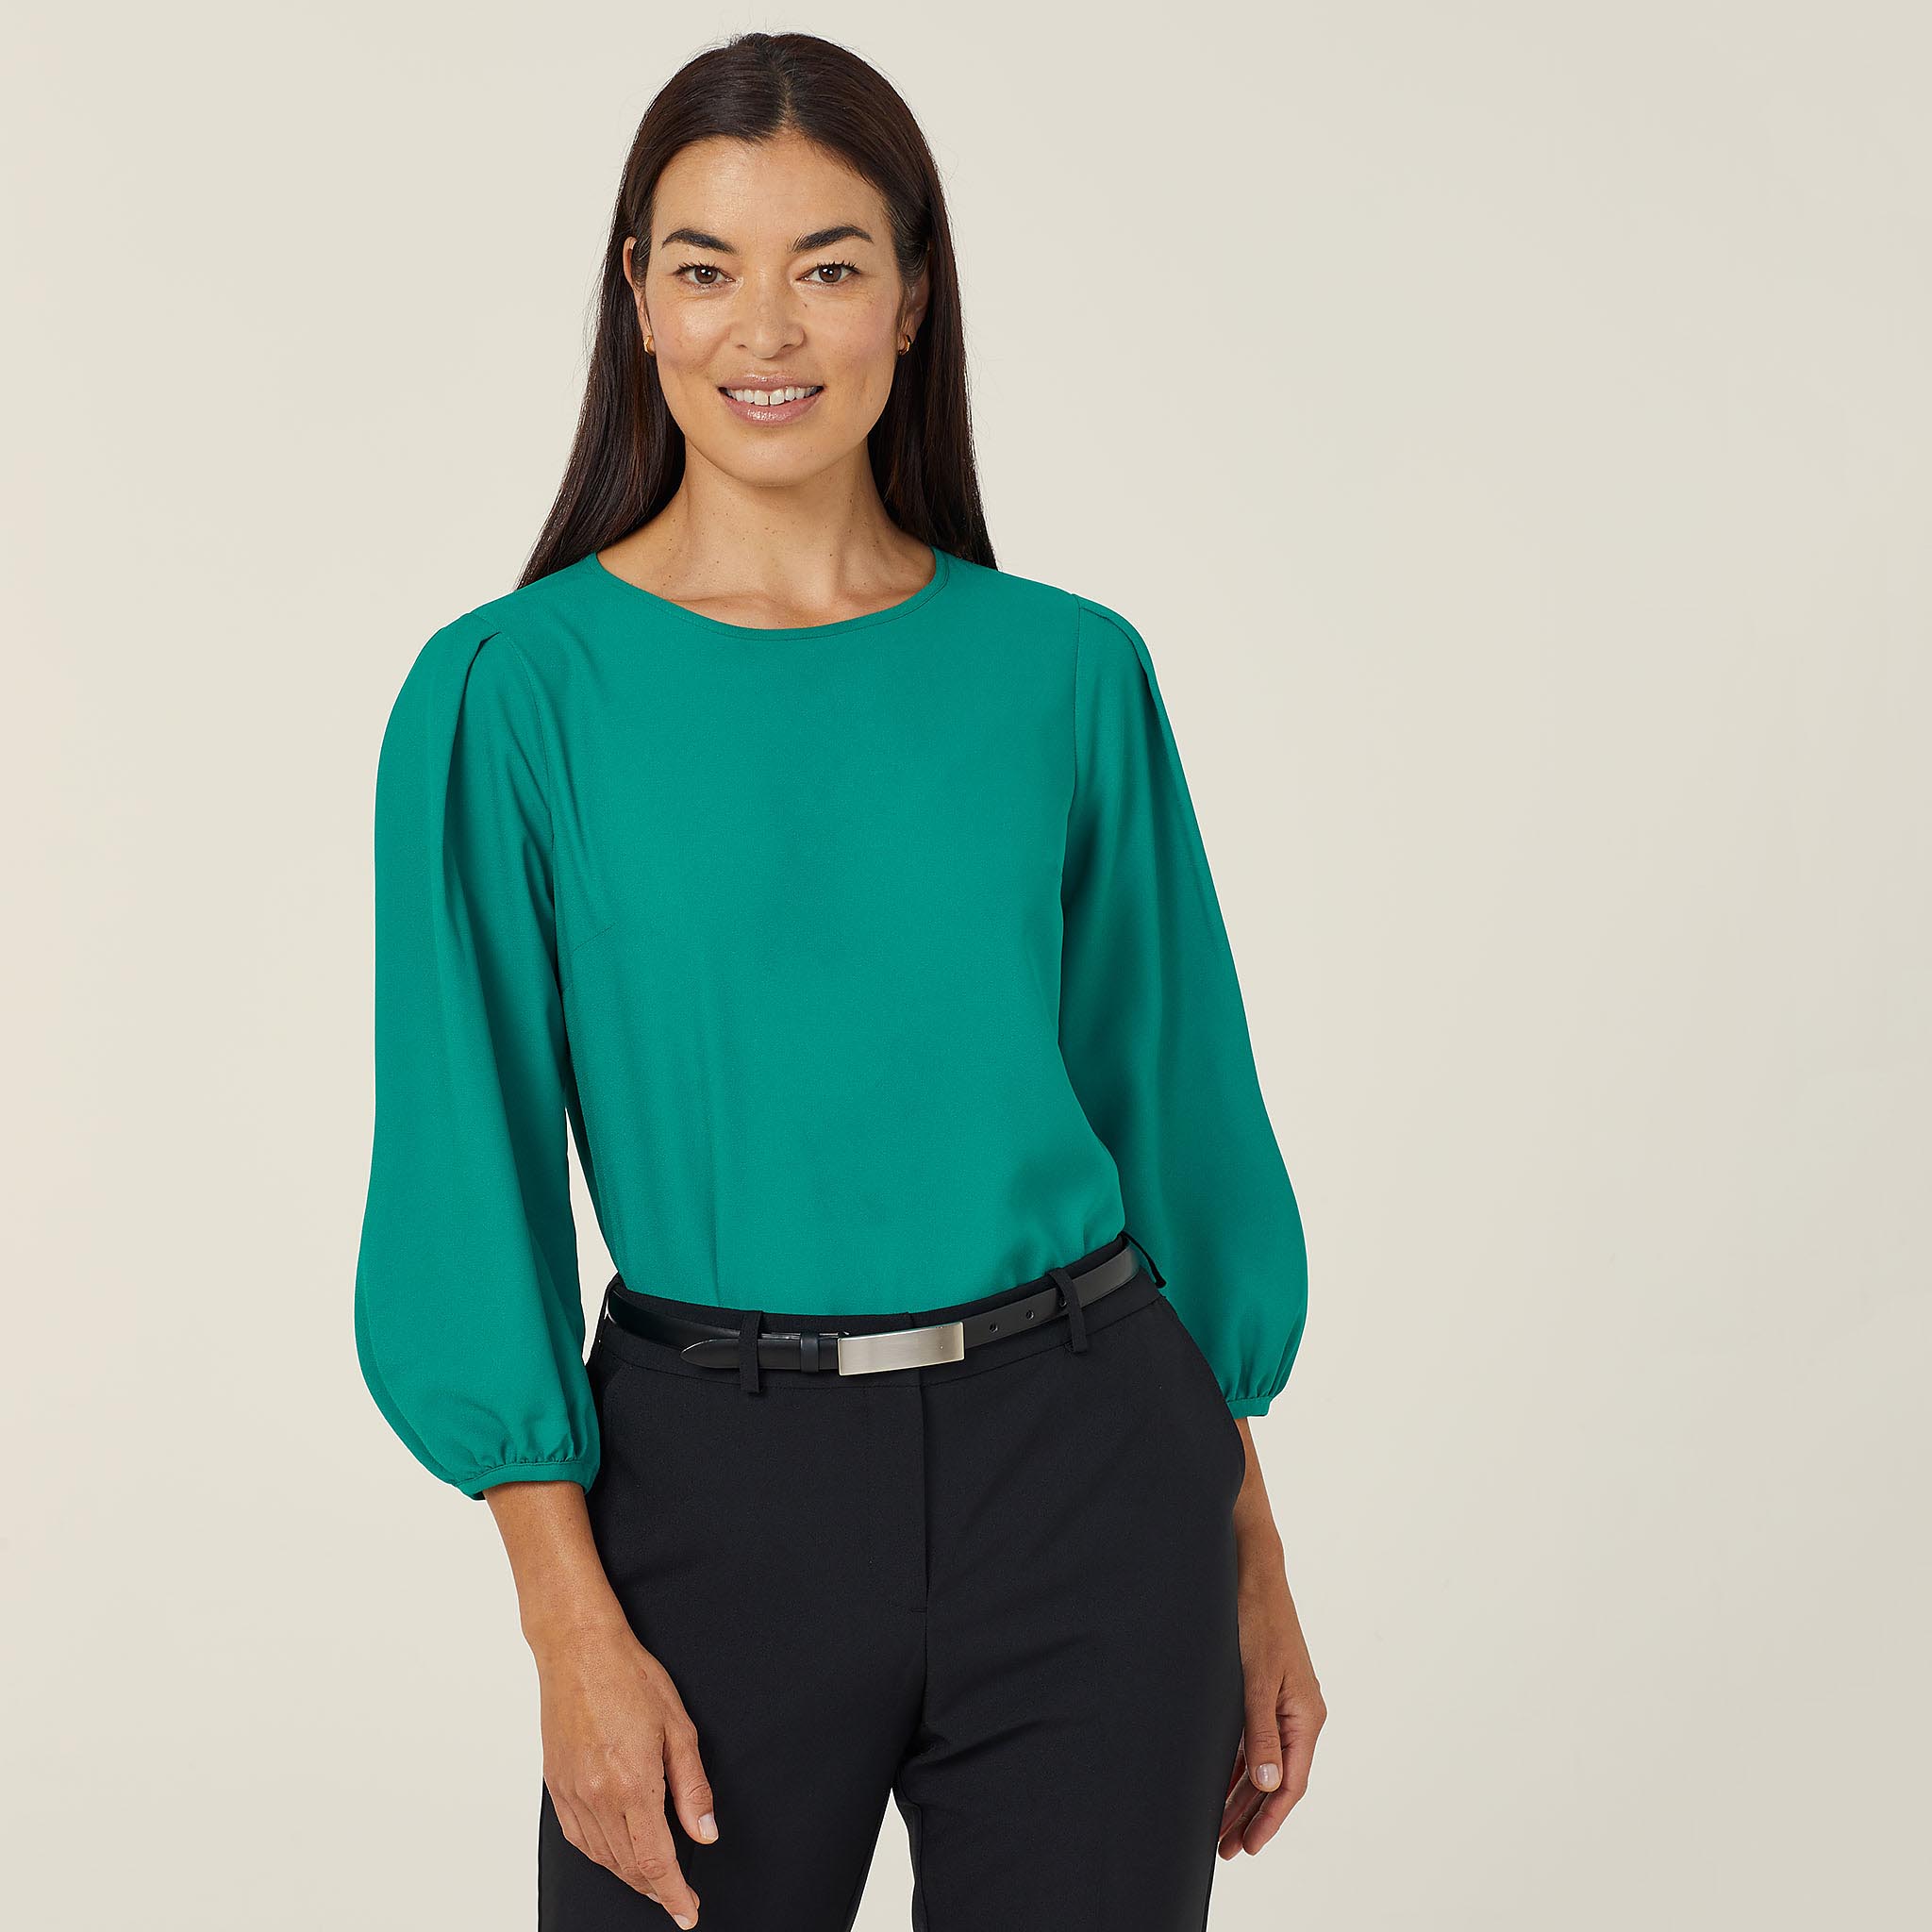 French Georgette 3/4 Sleeve Top, green | NNT Uniforms